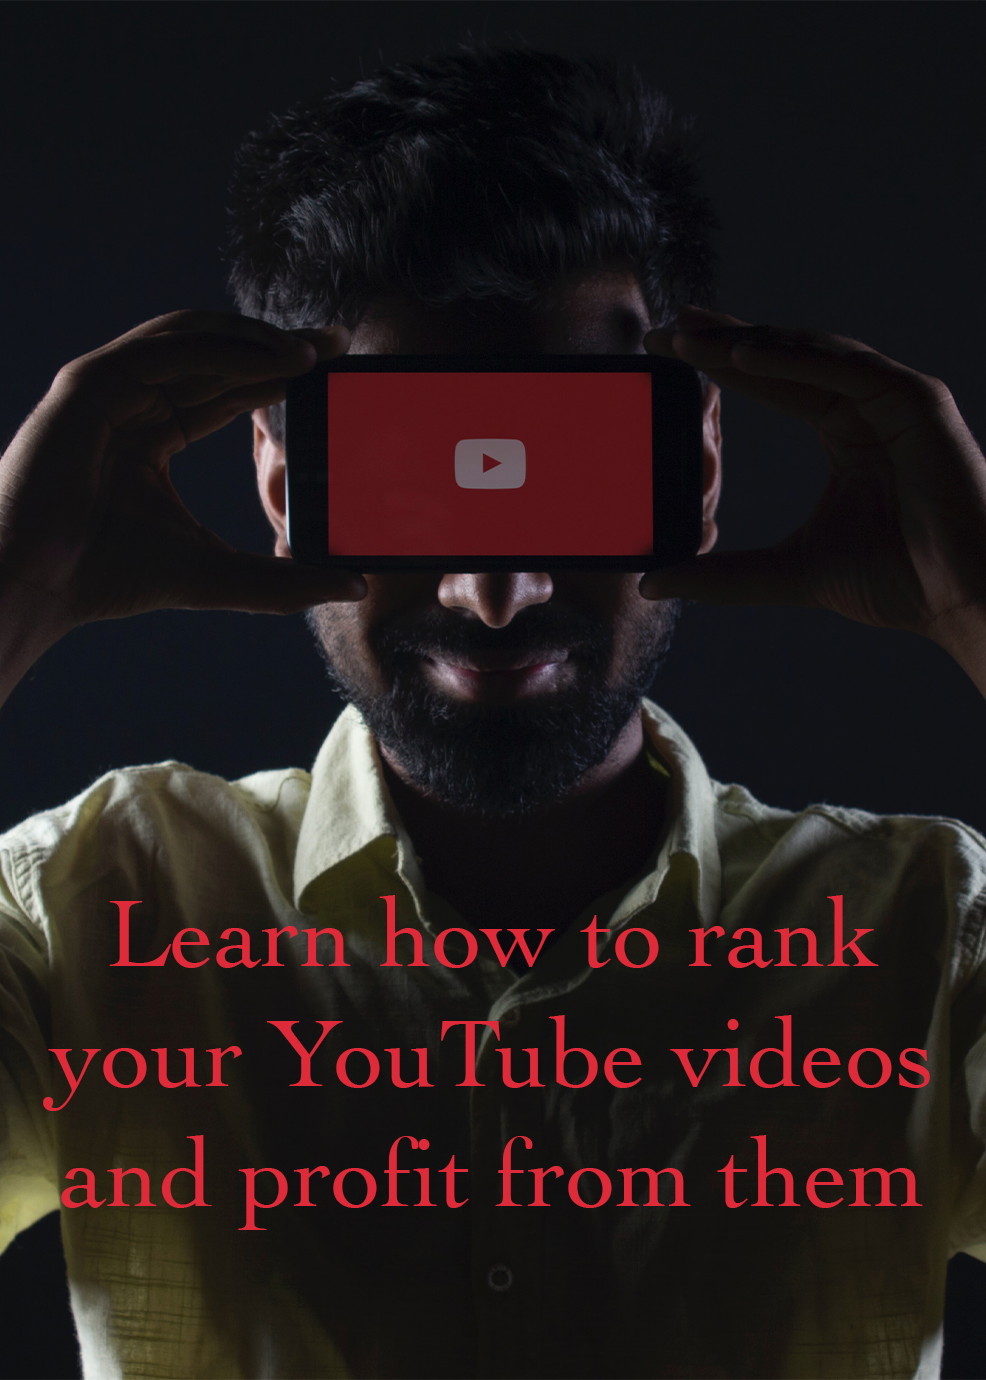 Learn How To Rank Your YouTube Videos and Profit From Them